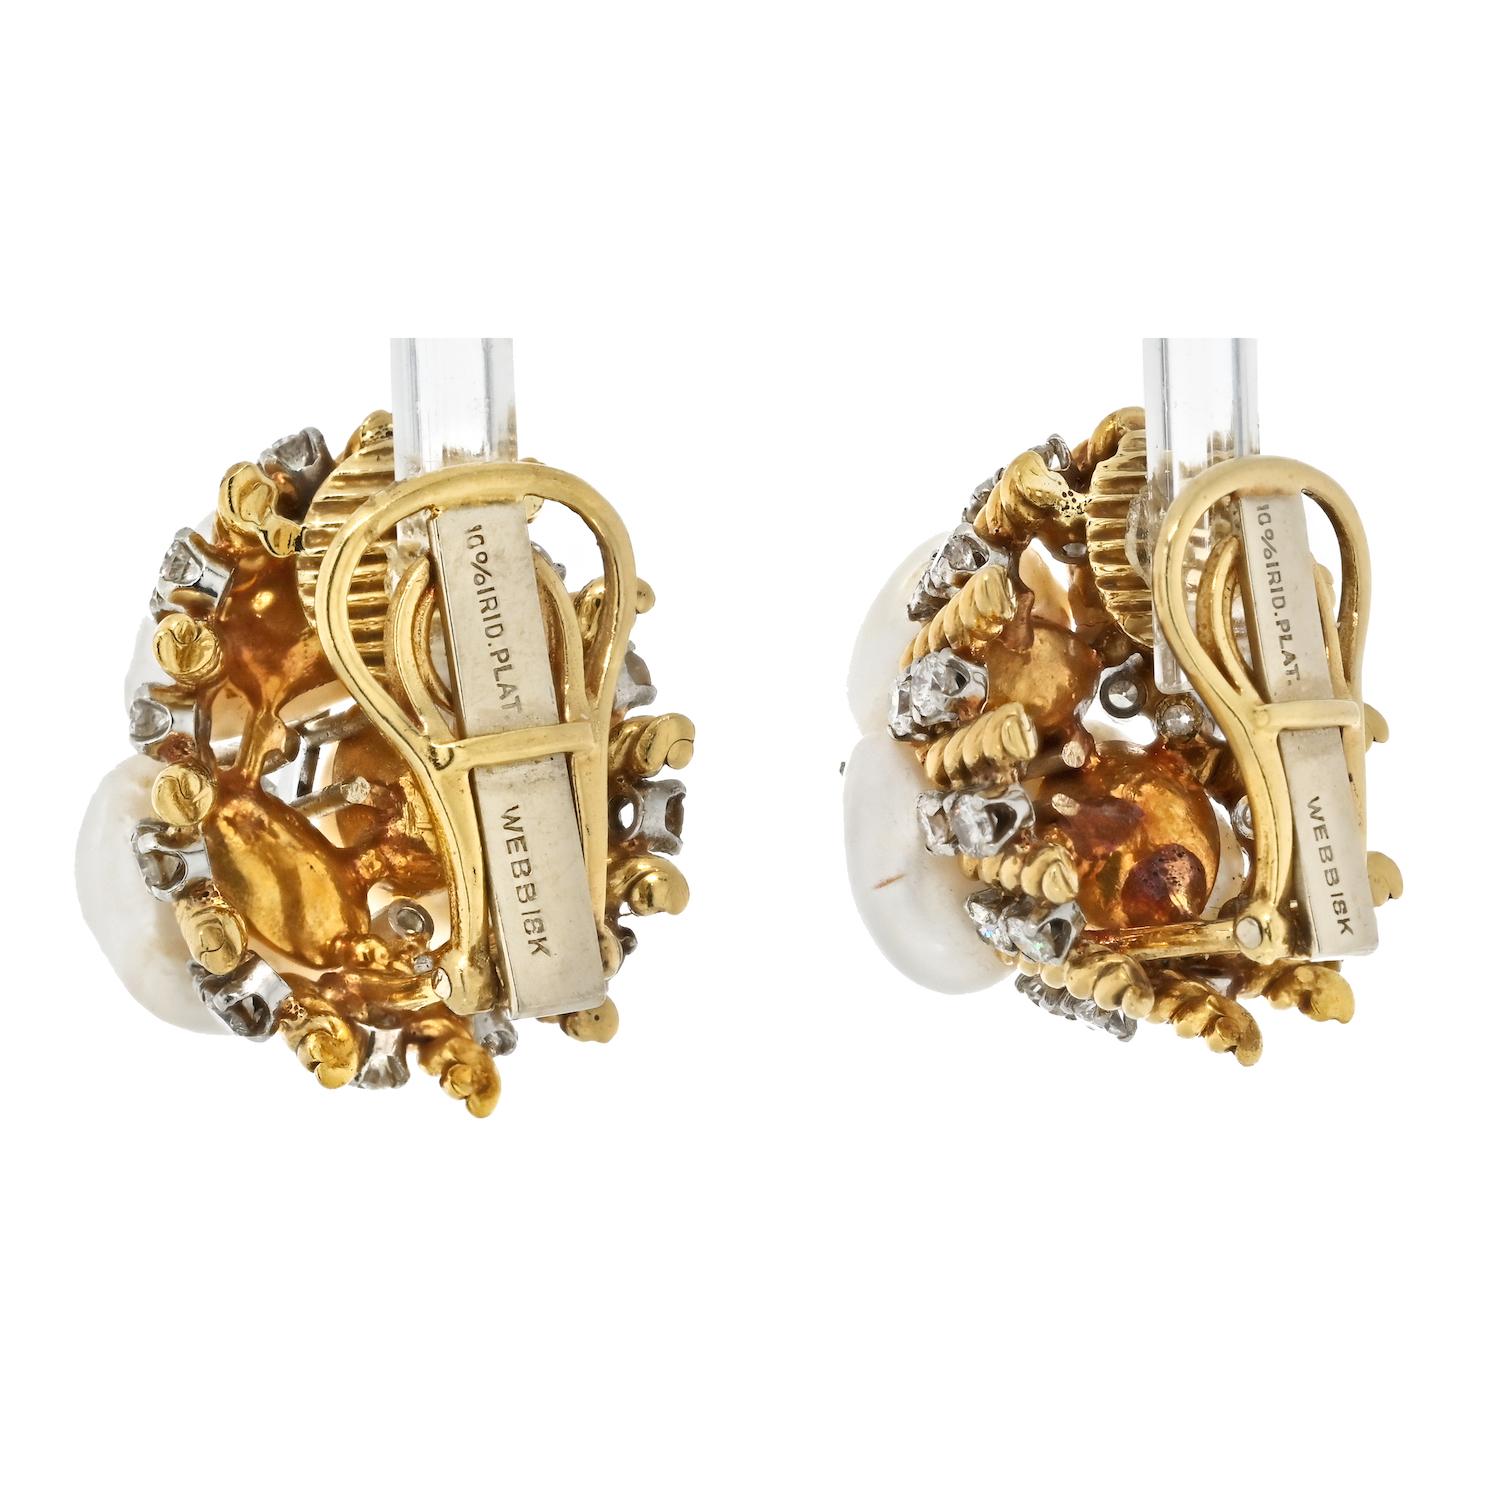 Taille ronde A David David Platinum & 18k Yellow Gold Diamond, Pearl, Dome Style Clip On Earring en vente